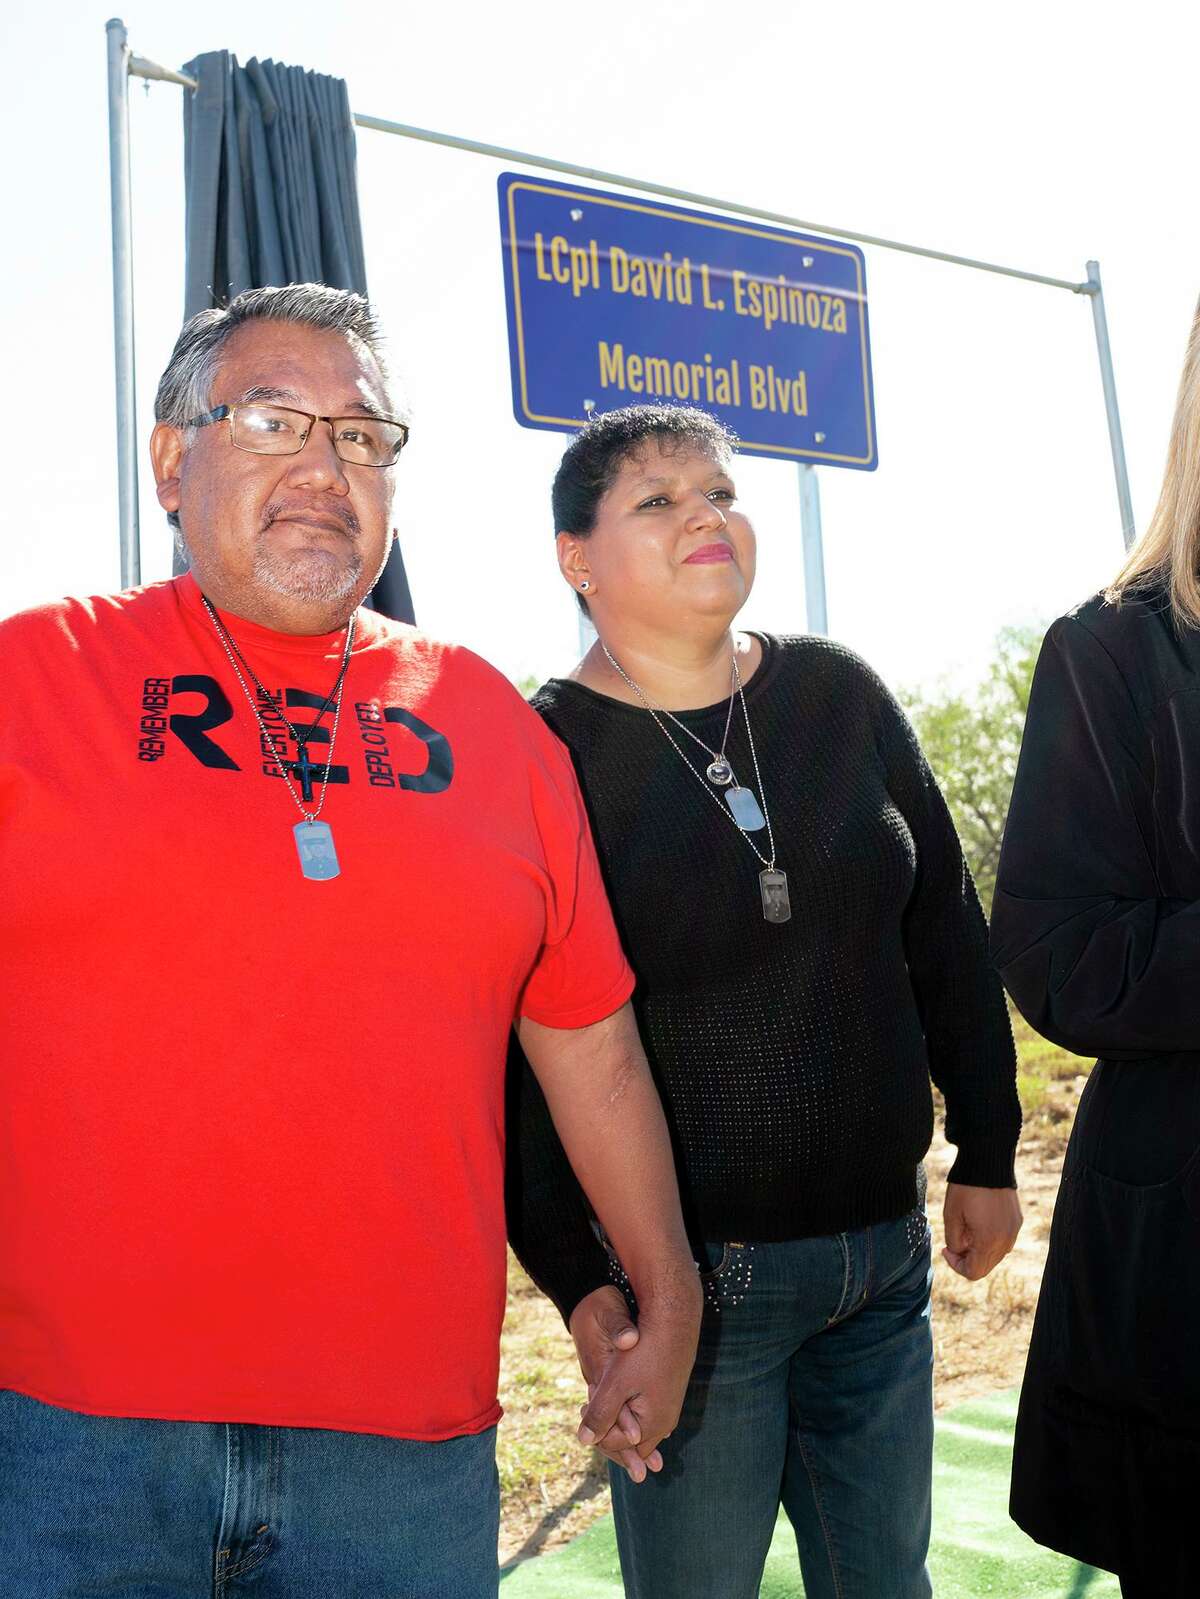 The parents of the late Lance Cpl. David Lee Espinoza -- Elizabeth Holguin and Victor Manuel Dominguez -- stand next to the recently revealed sign renaming Cielito Lindo Blvd to LCpl David L. Espinoza Memorial Blvd., Friday, Nov. 19, 2021 during a dedication ceremony.